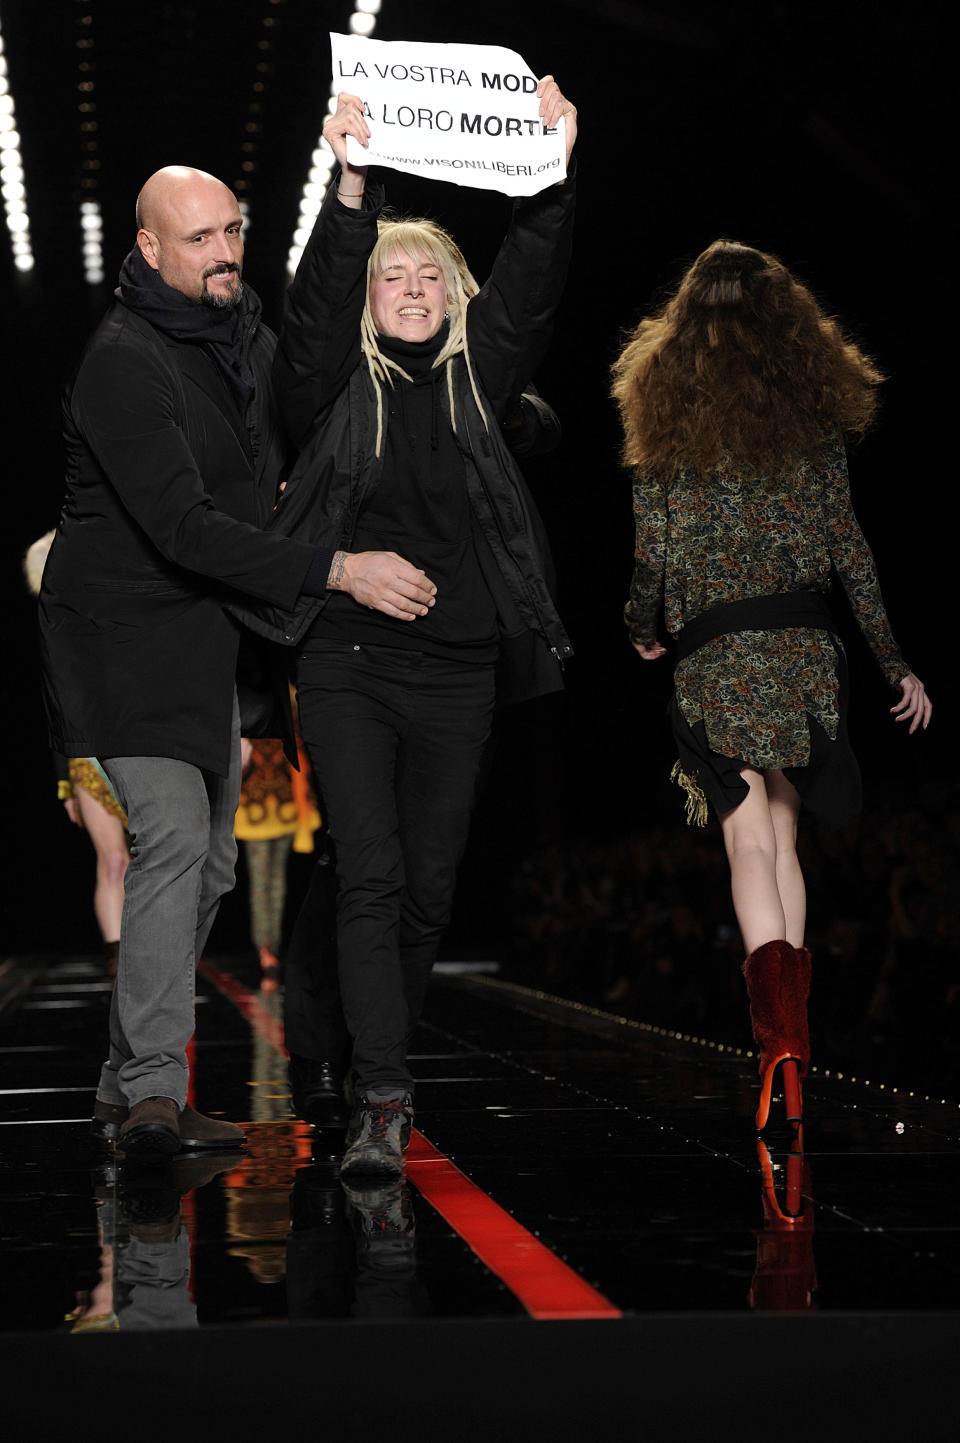 A security guard stops an animal rights activist walking on the catwalk with a placard reading in Italian "La vostra moda la loro morte" (Your fashion their death) during the show of the Just Cavalli women's Fall-Winter 2013-14 collection, part of the Milan Fashion Week, unveiled in Milan, Italy, Thursday, Feb. 21, 2013. (AP Photo/Giuseppe Aresu)